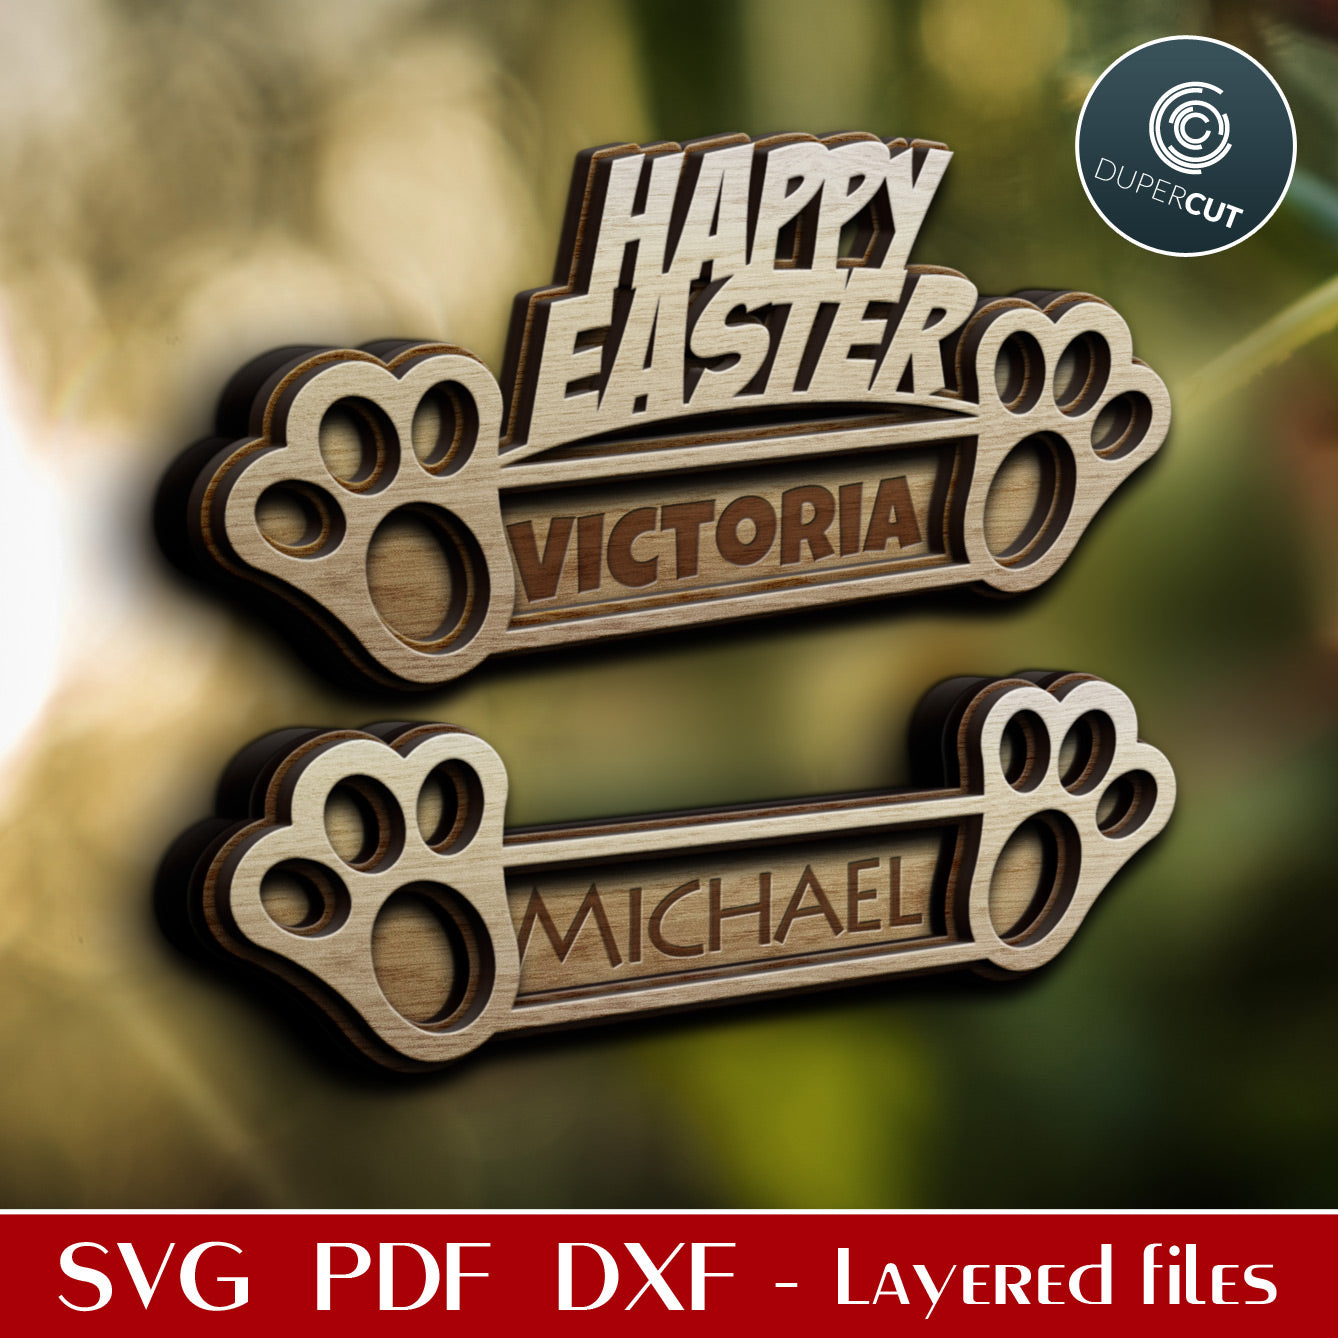 Happy Easter - Layered personalized name tags - SVG PDF DXF vector files for laser cutting with Glowforge, Cricut, Silhouette Cameo, CNC plasma machines